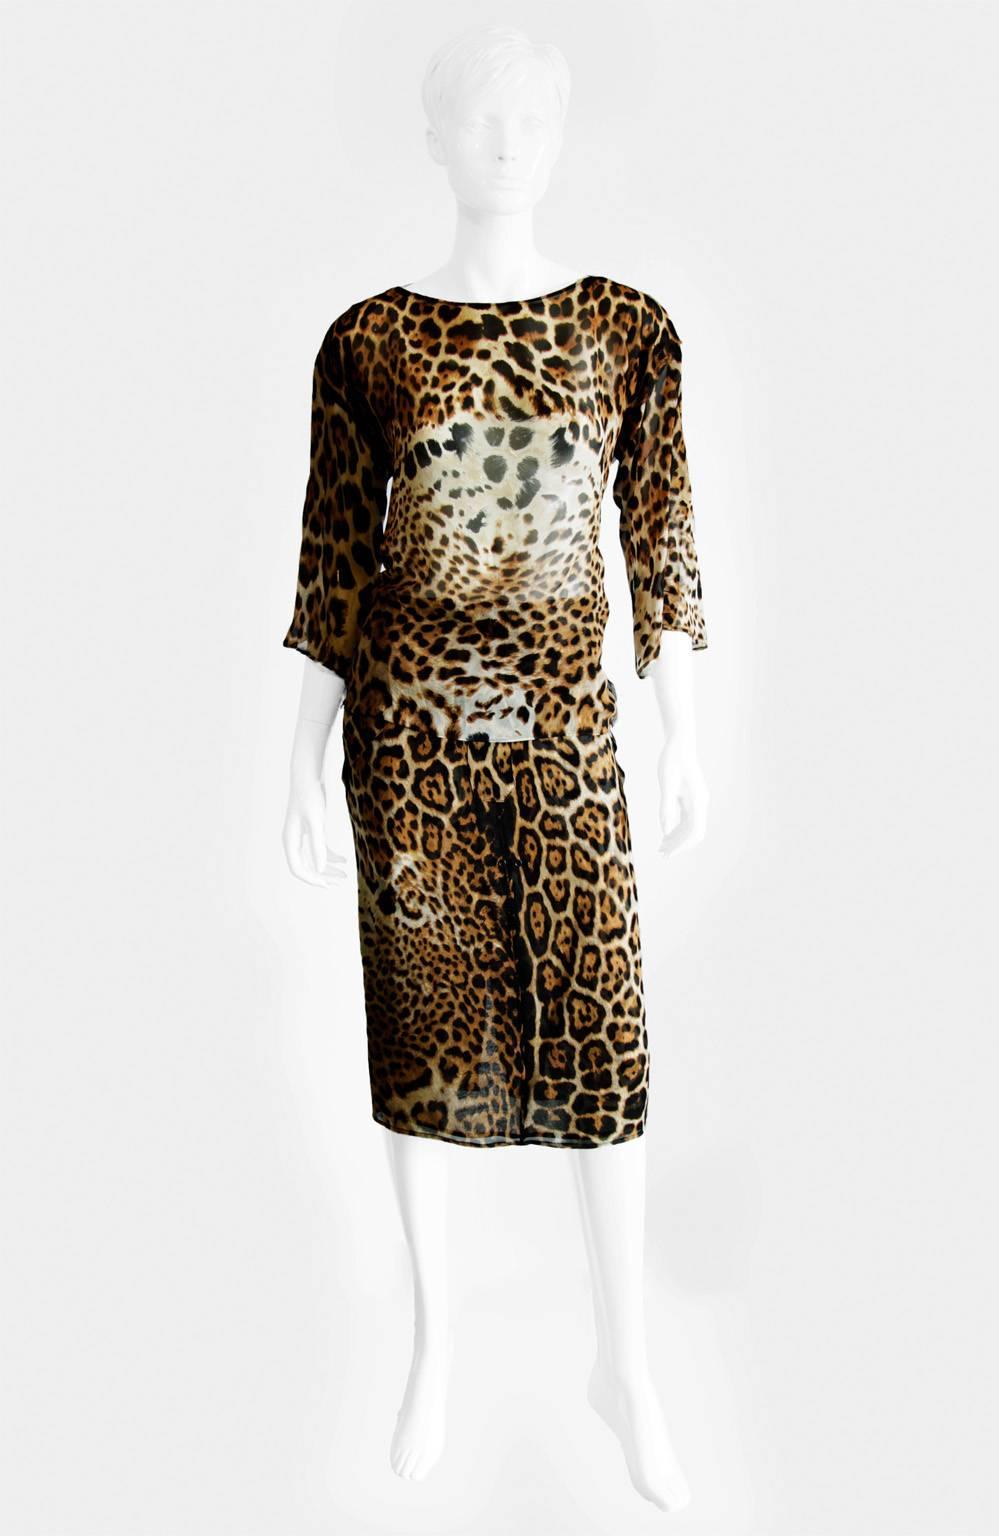 Rare & Iconic Tom Ford for YSL Rive Gauche Spring Summer 2002 Safari Collection Runway Skirt Suit!

Rare 2pc runway set from Tom Ford's acclaimed Spring/Summer 2002 Safari/Mombasa Collection for YSL Rive Gauche. This extremely rare &